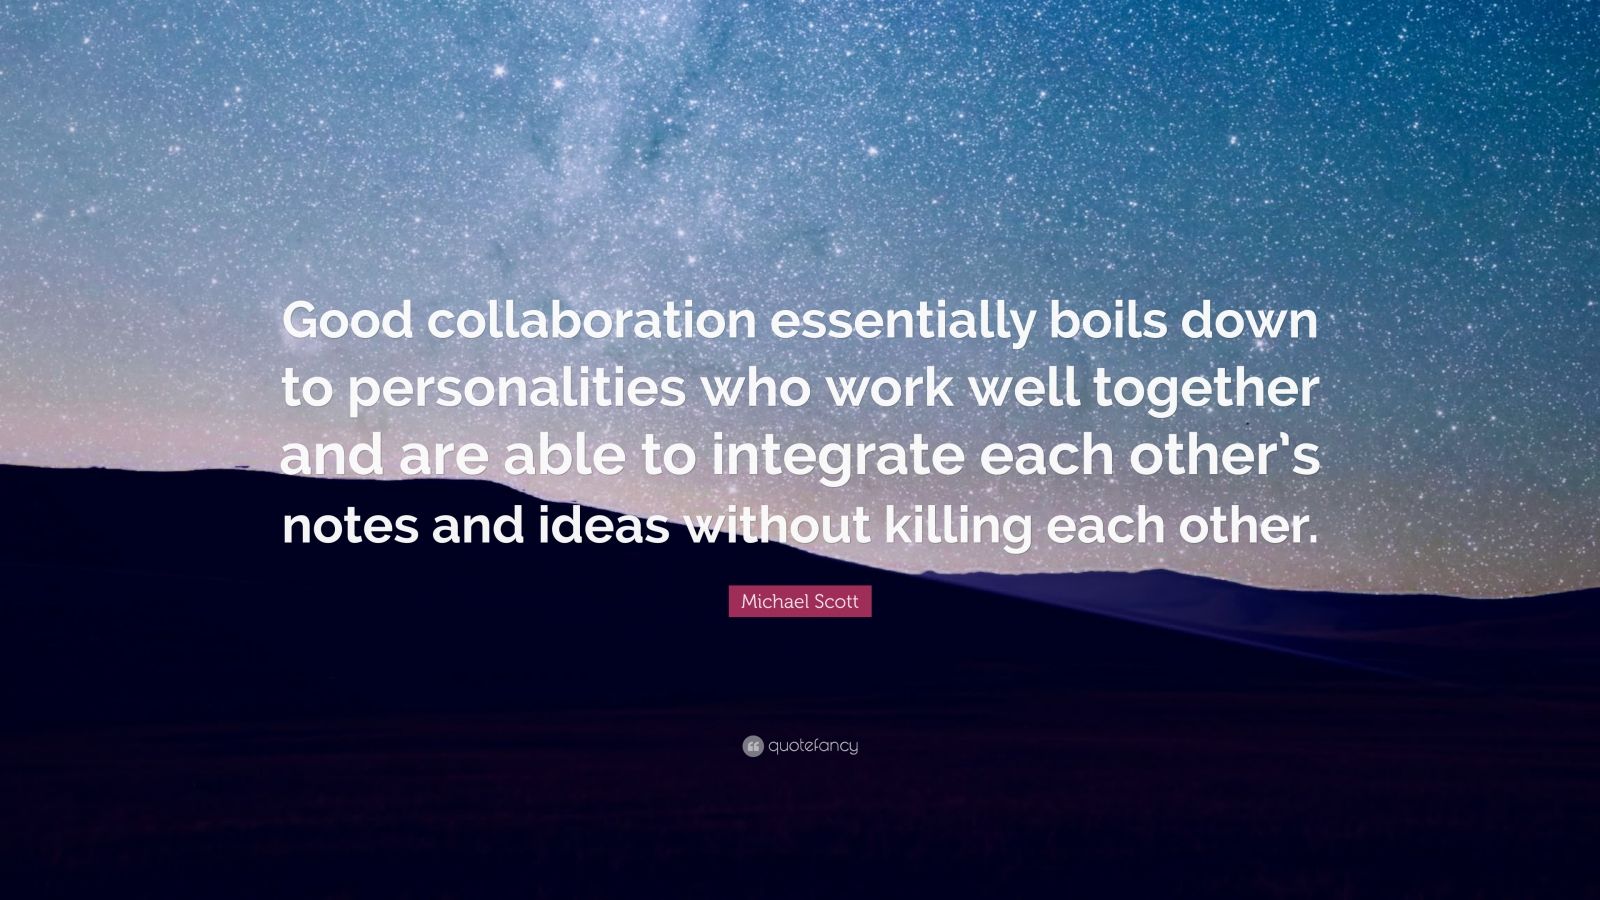 Michael Scott Quote: “Good collaboration essentially boils down to ...